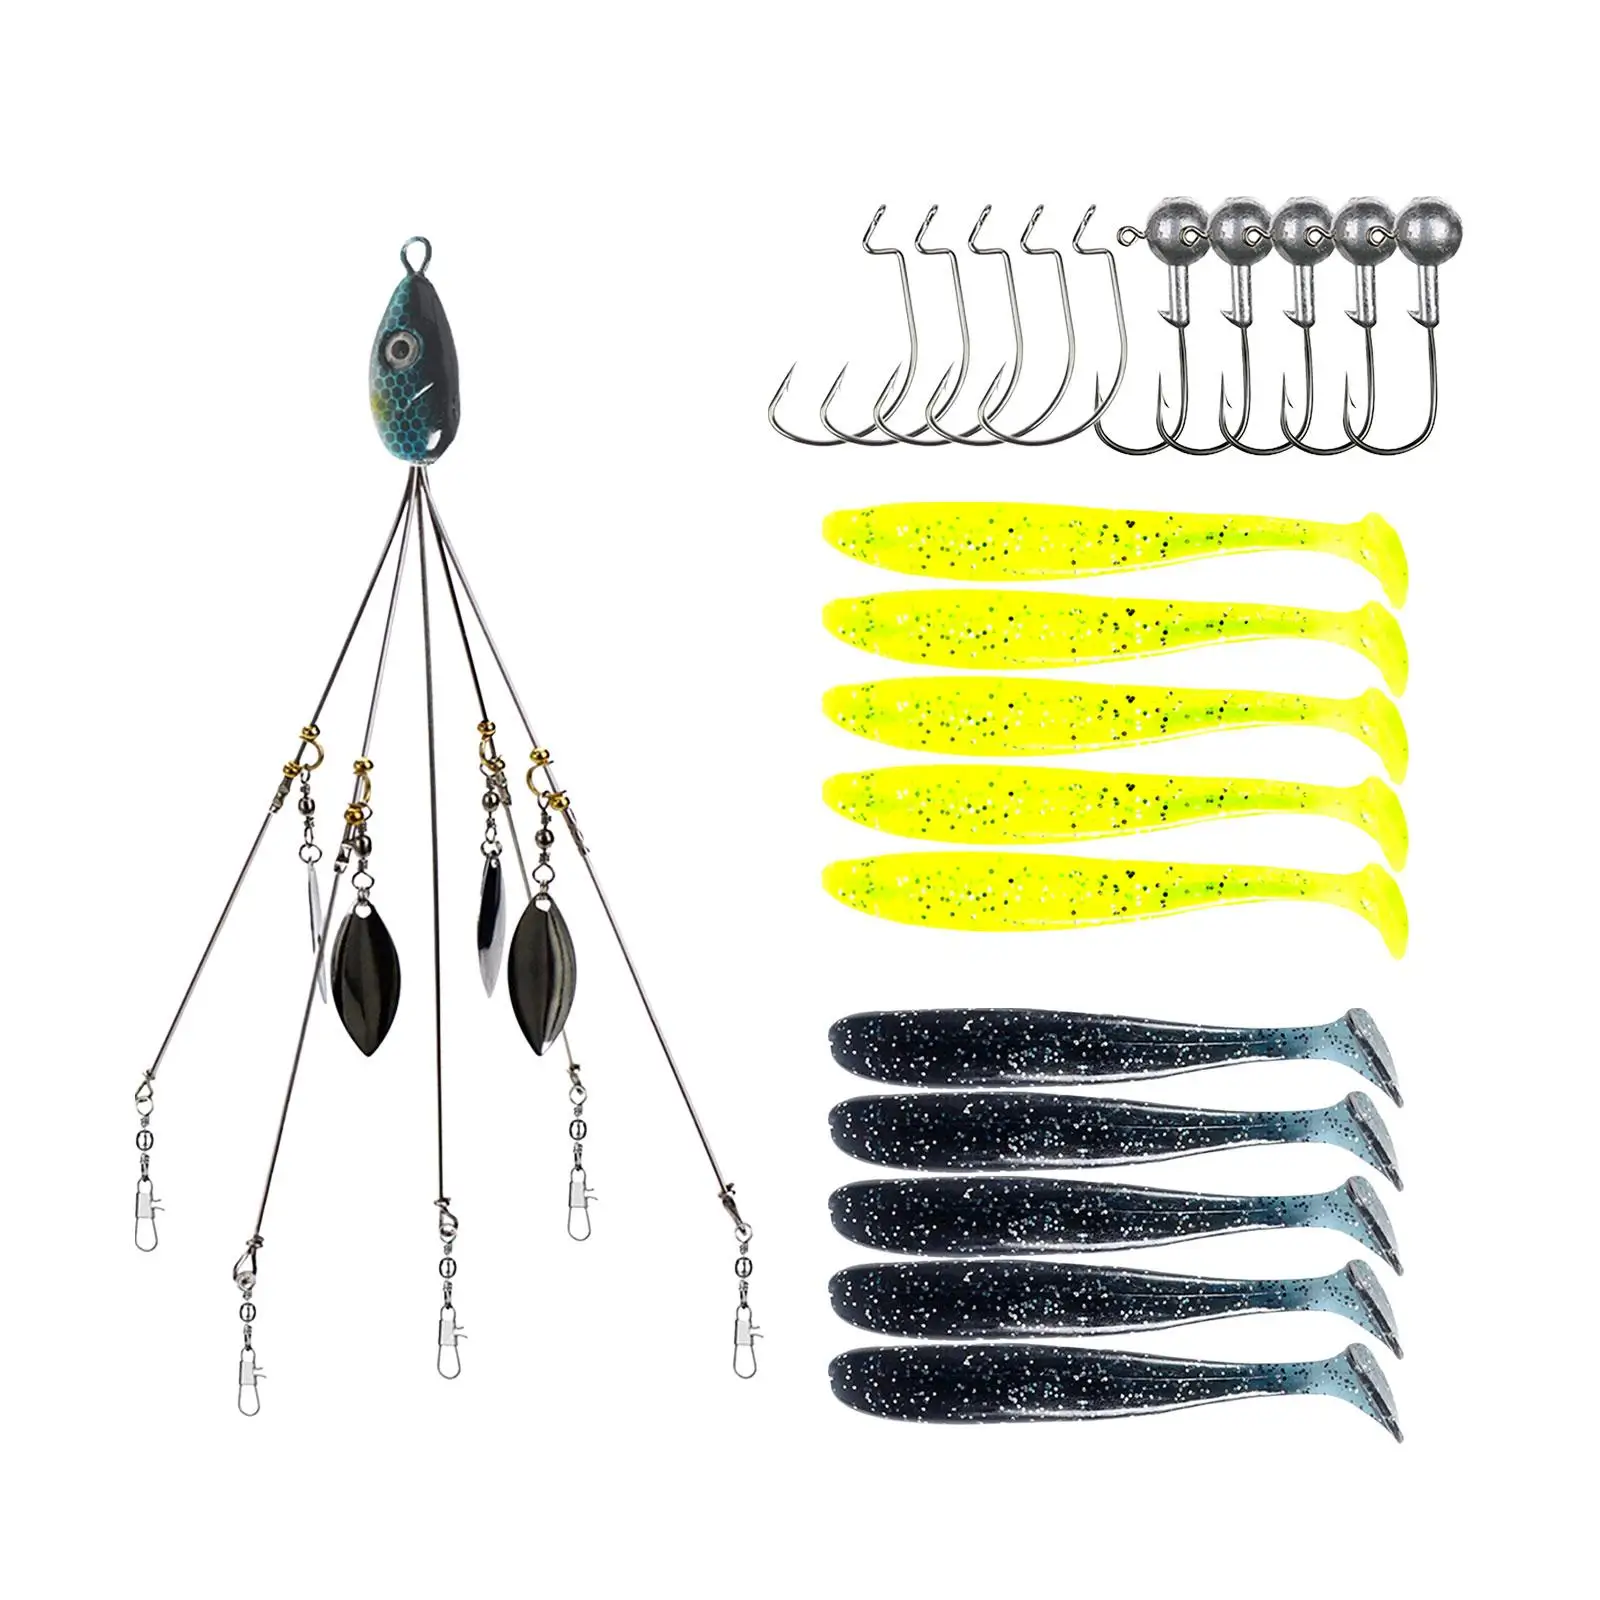 Umbrella Rig Freshwater/saltwater with 4 Leaves 5 Arms for Striper Fishing A Rig for Trout Crappie Walleye Pickerel